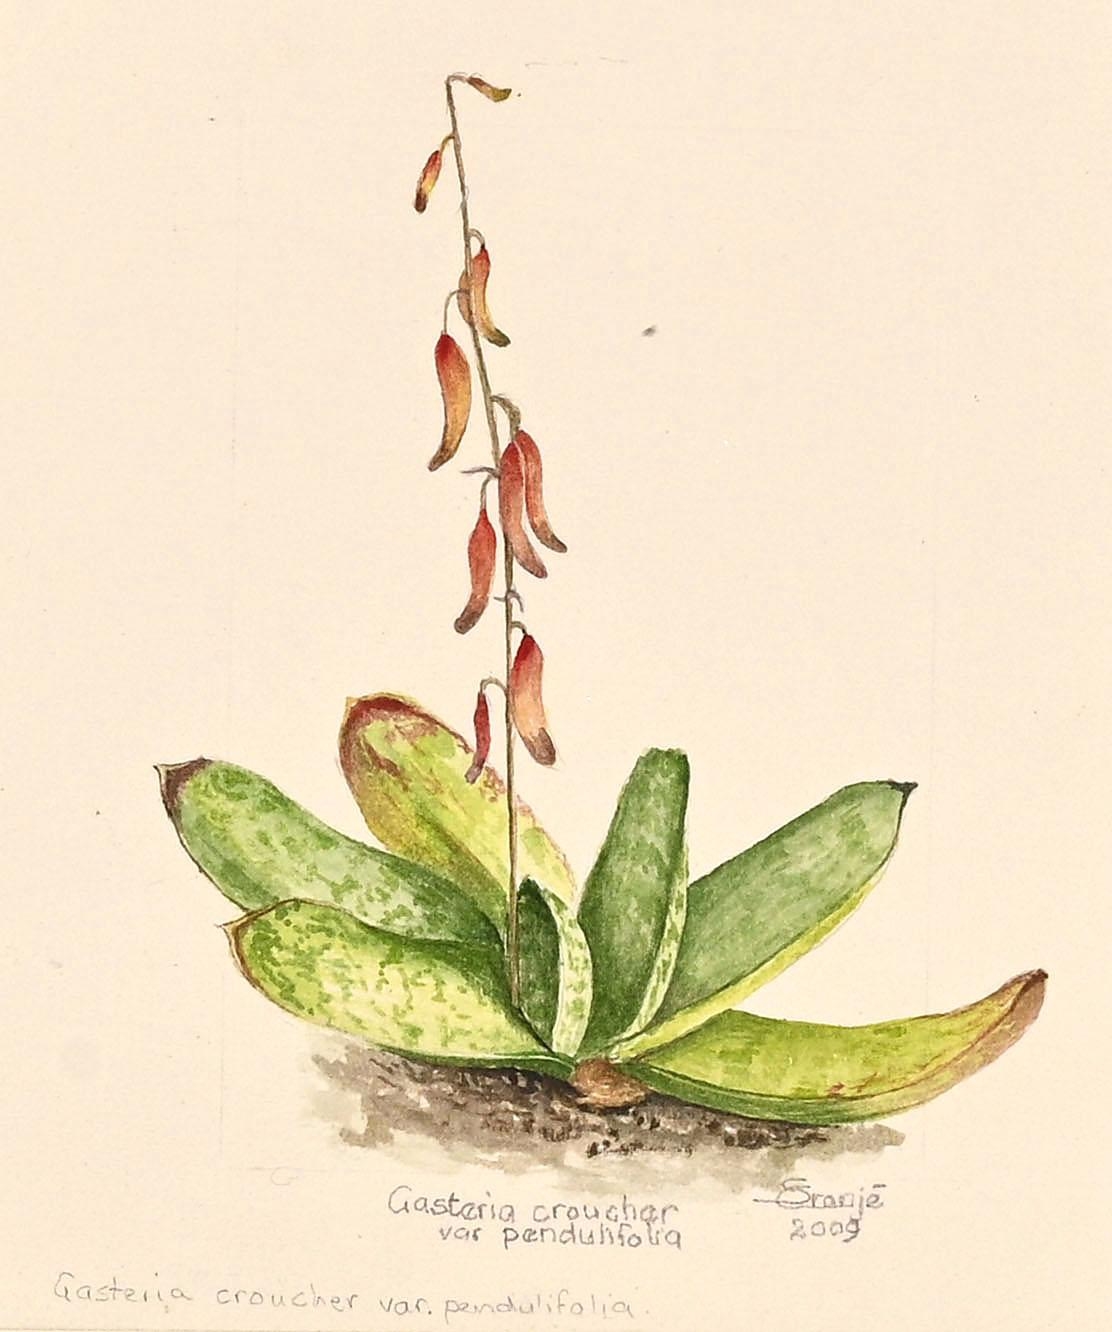 Artwork by Susan Cronje, Two Works: Gasteria croucher var pendulifolia, and Crocosima, Made of watercolour over pencil on paper